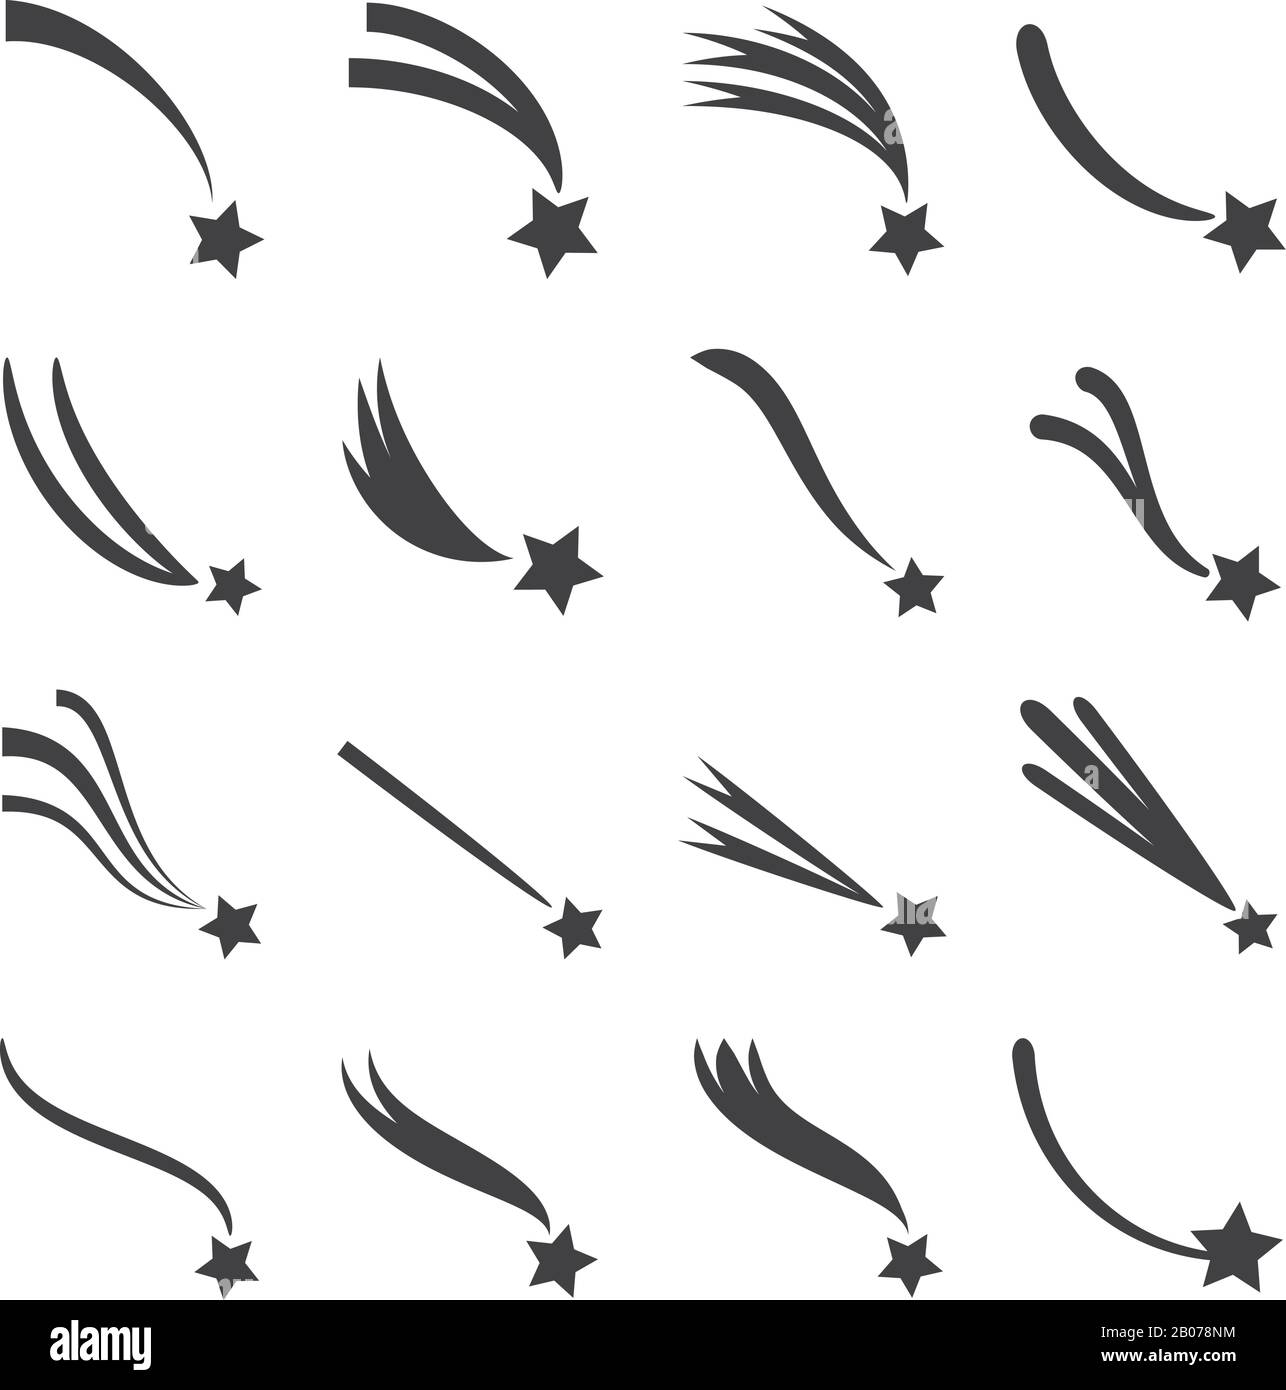 Falling, shooting stars, meteorites and comets with tails vector icons set. Comet with tail fall illustration Stock Vector